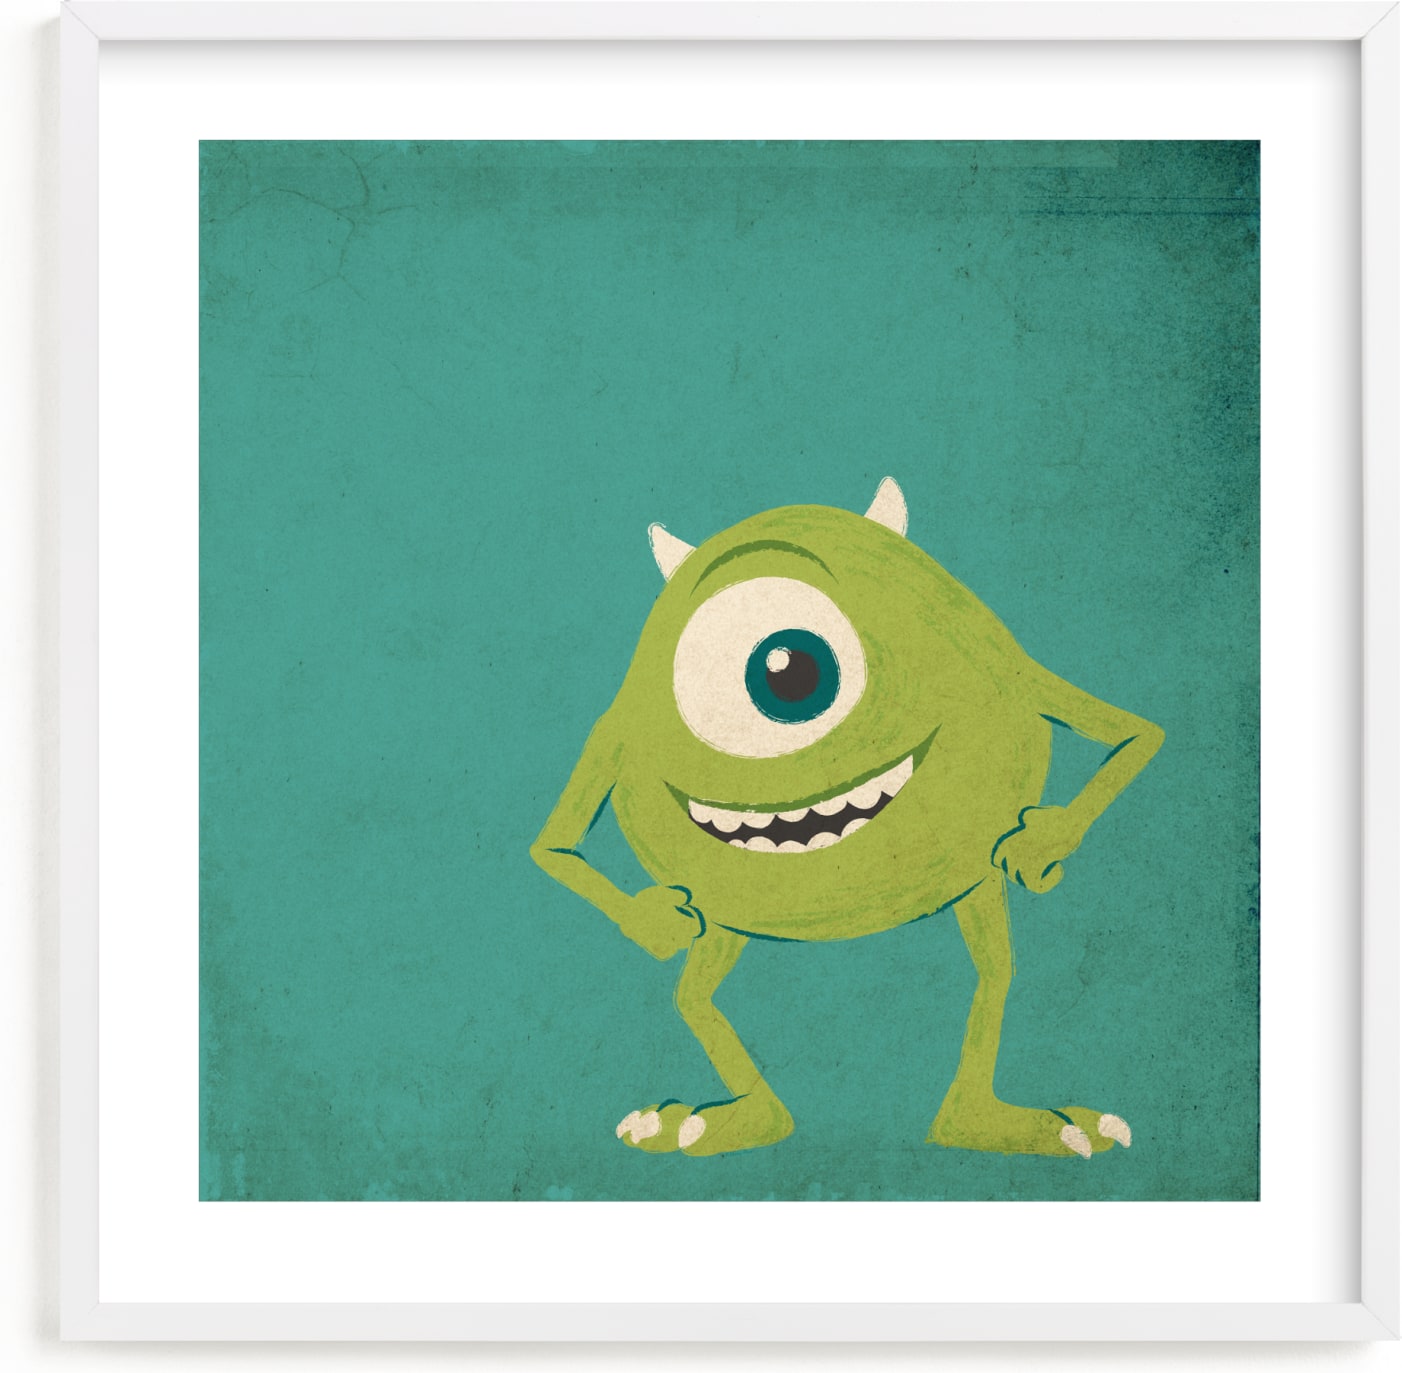 This is a green disney art by Kiersten Garner called Mike from Disney and Pixar's Monster's Inc.